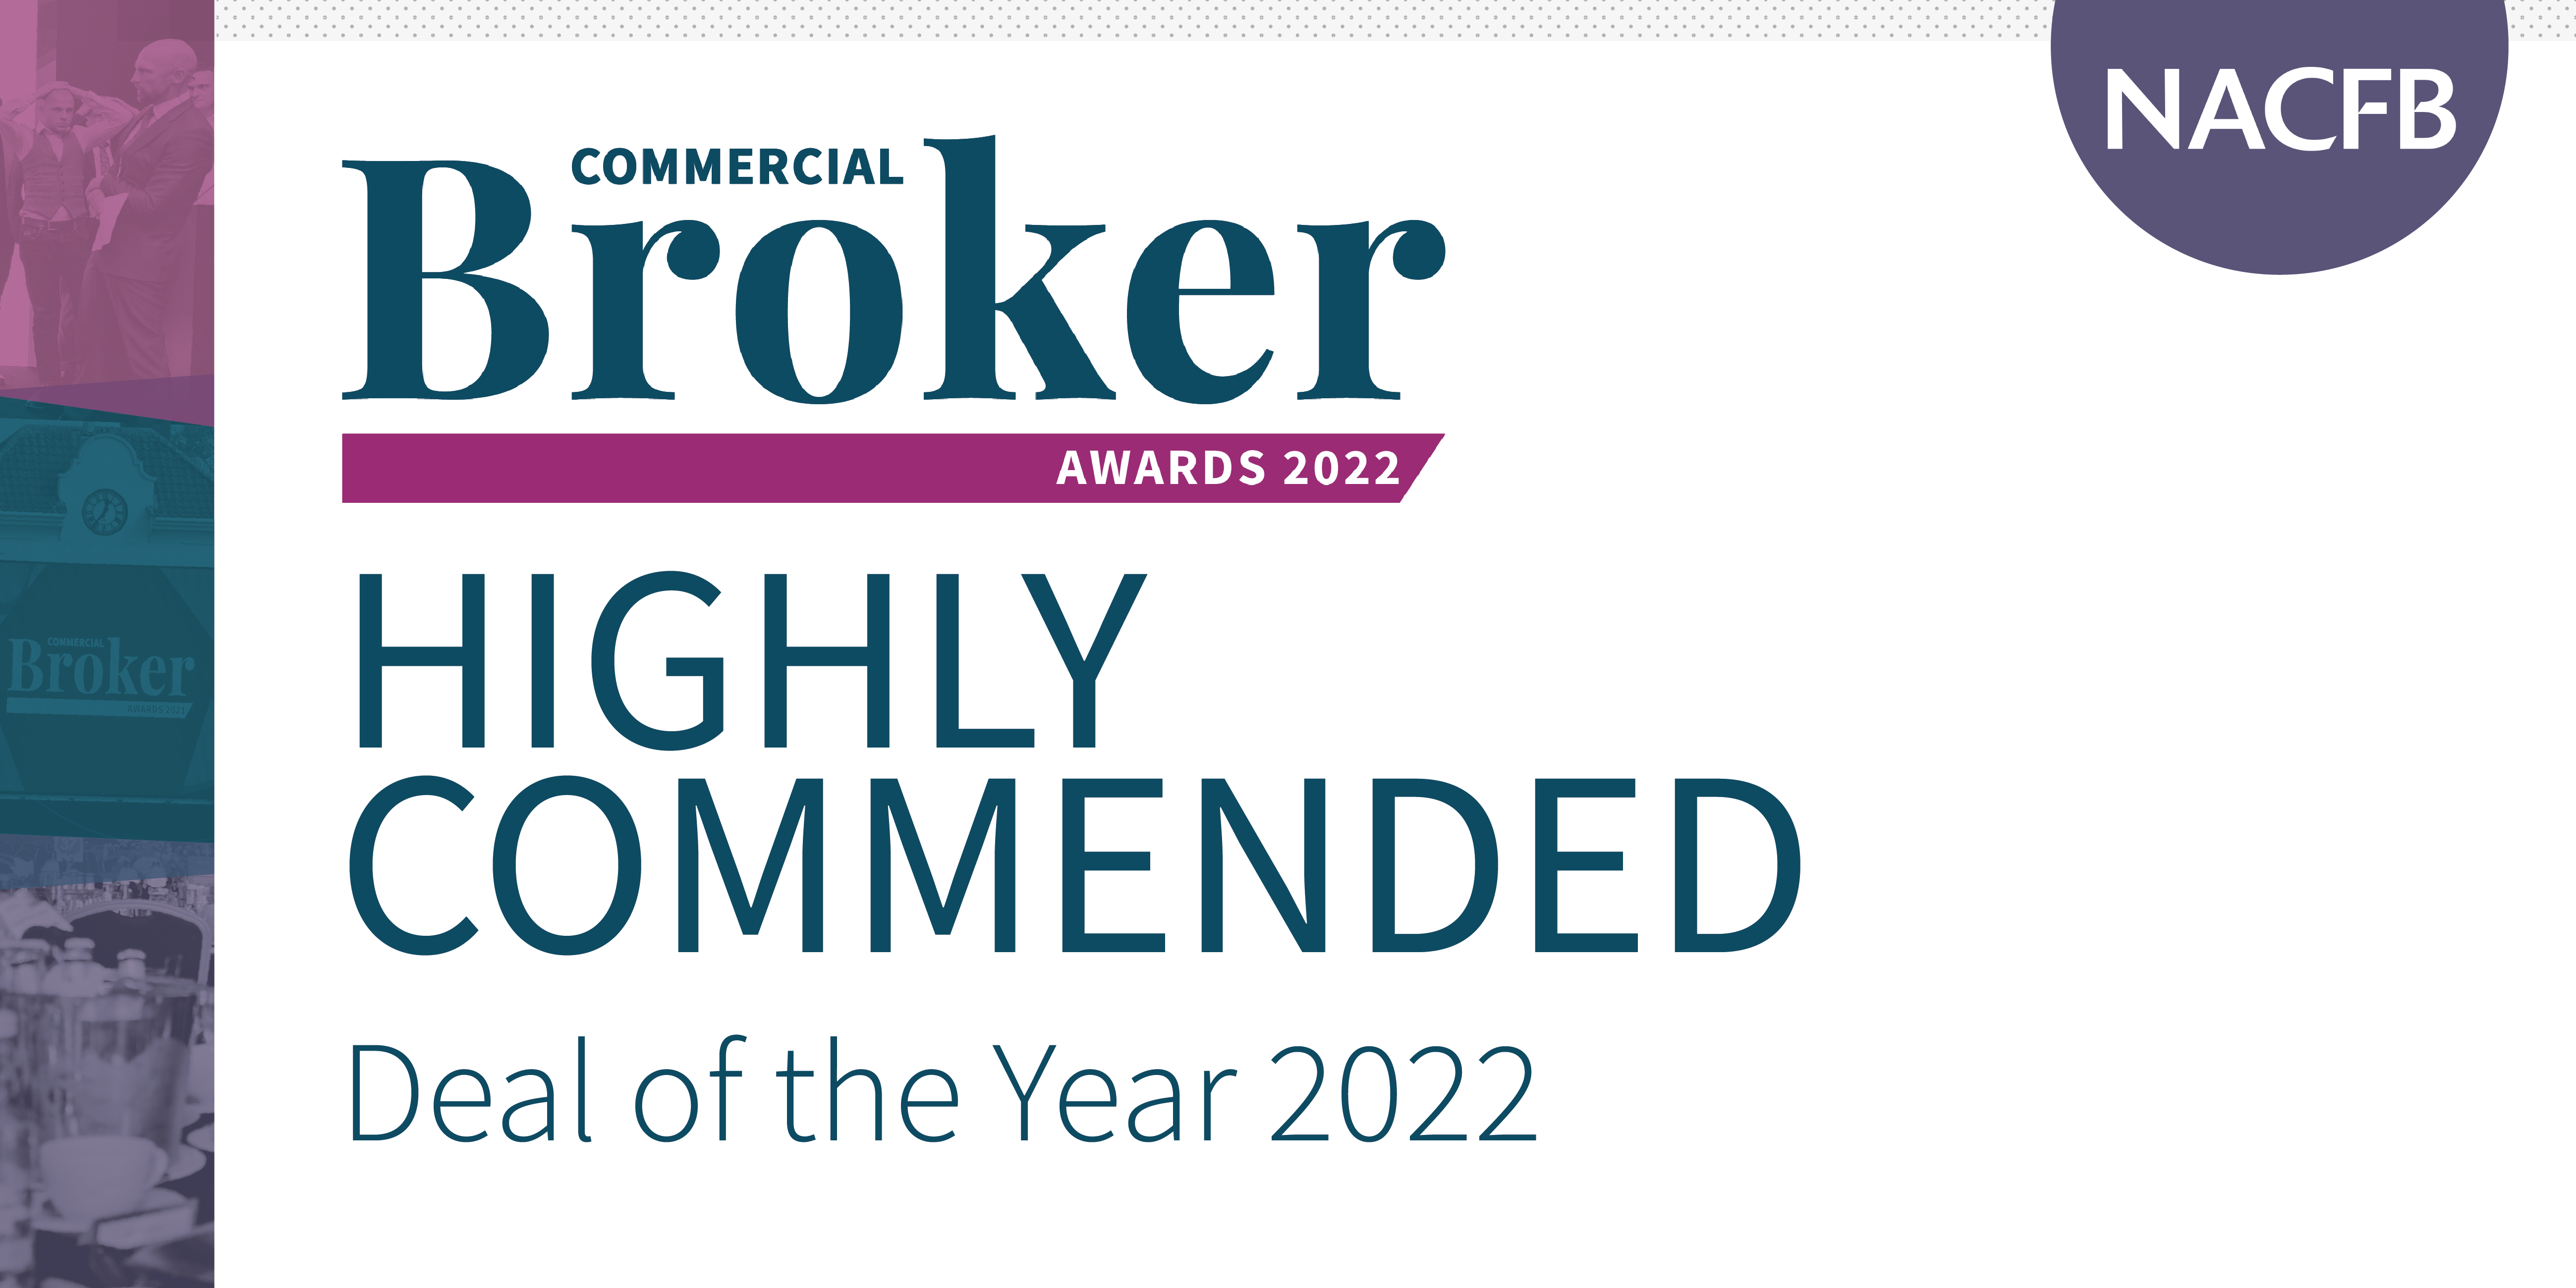 Highly Commended - Deal of the Year 2022 NACFB